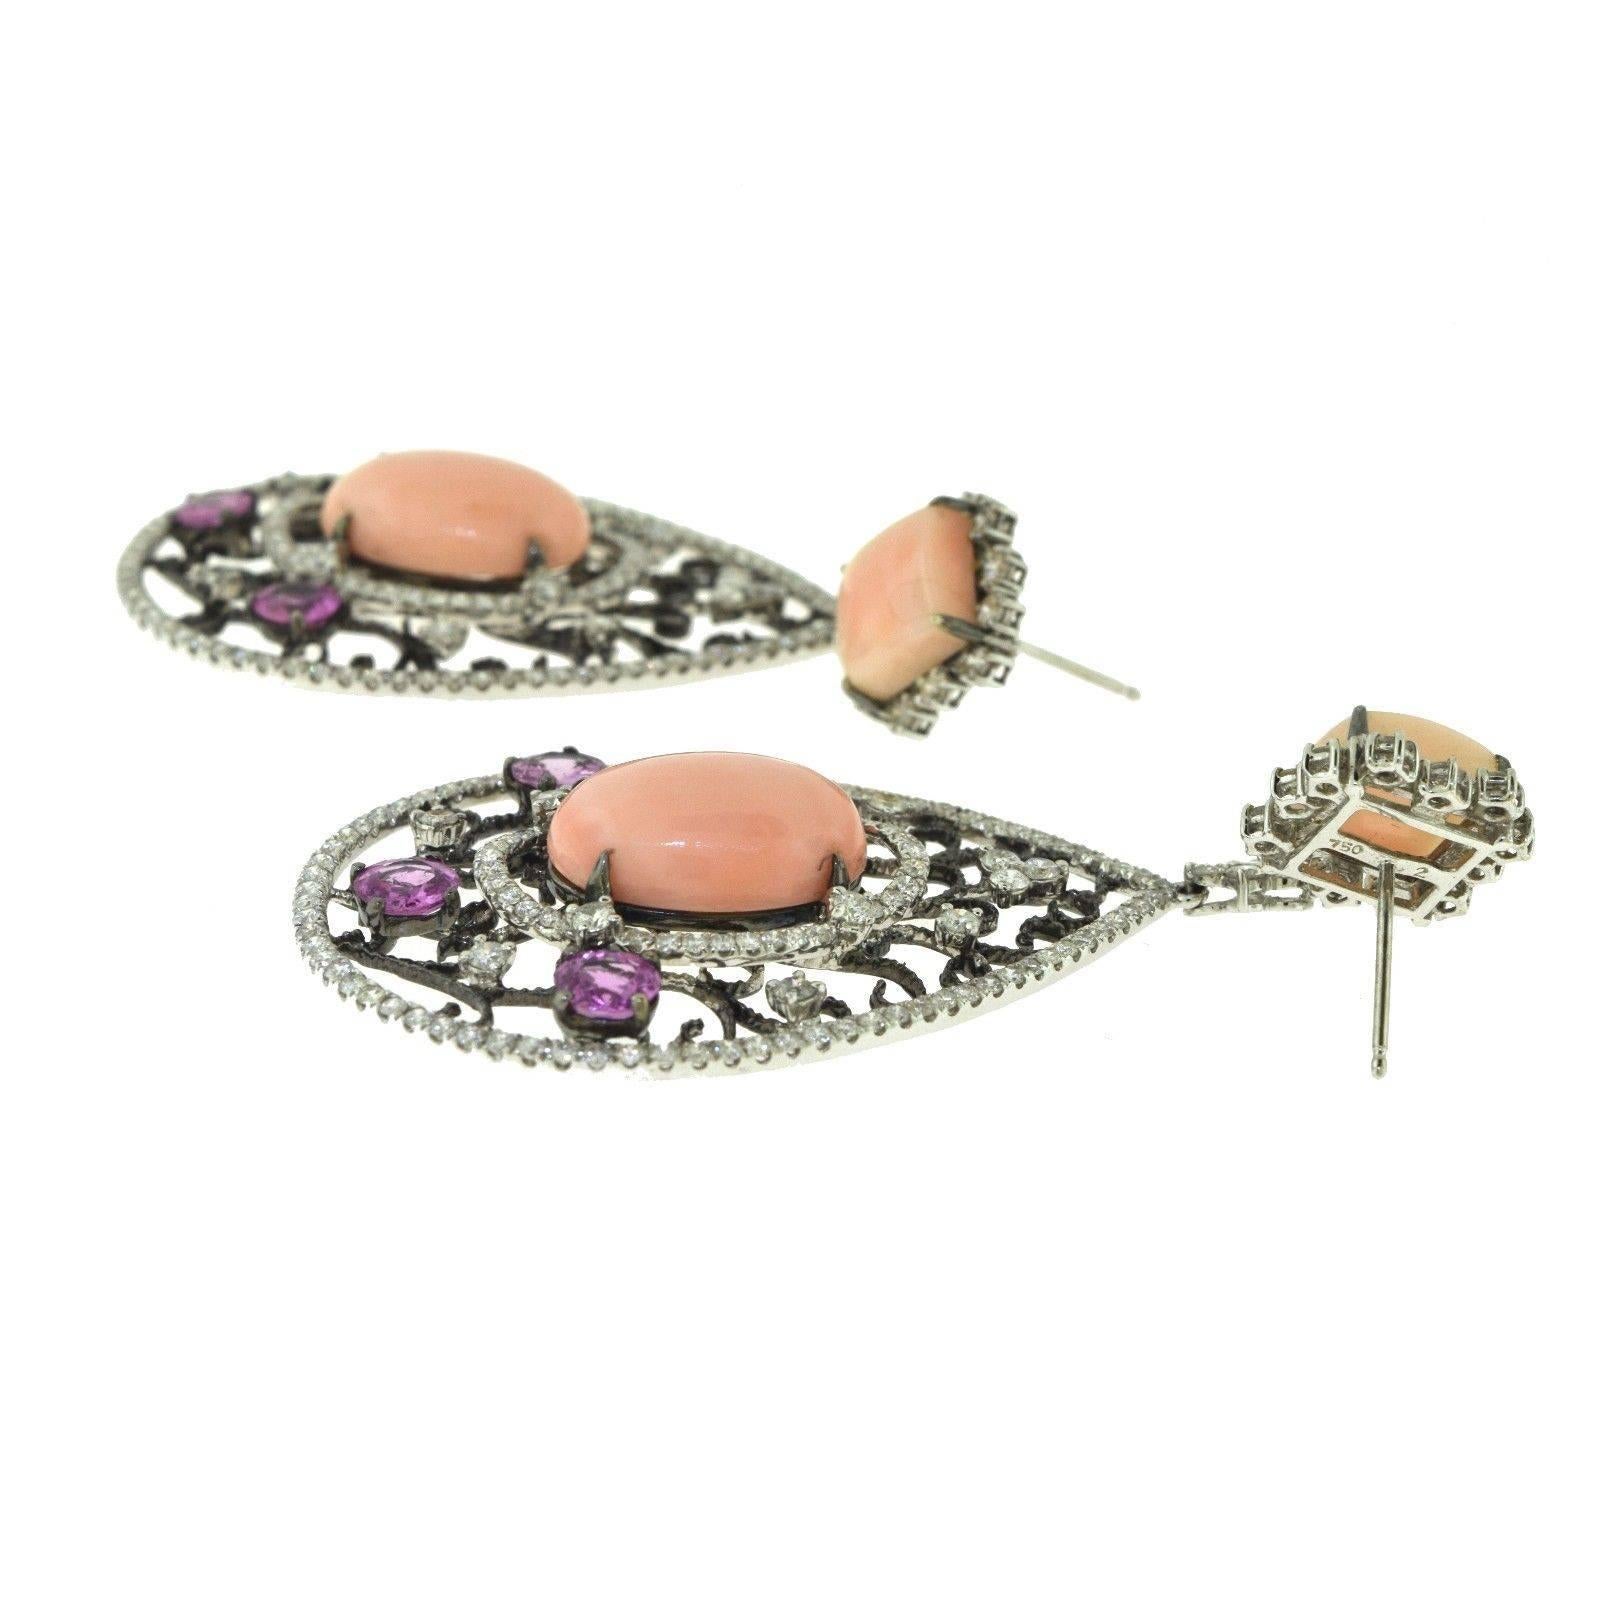 Gorgeous long dangle earrings in 18k white gold, composed of the most delegately intertwined filigree style adorned with three round sapphires for a total of 6. The natural pink coral stones add the most beautiful touch of elegance along with the